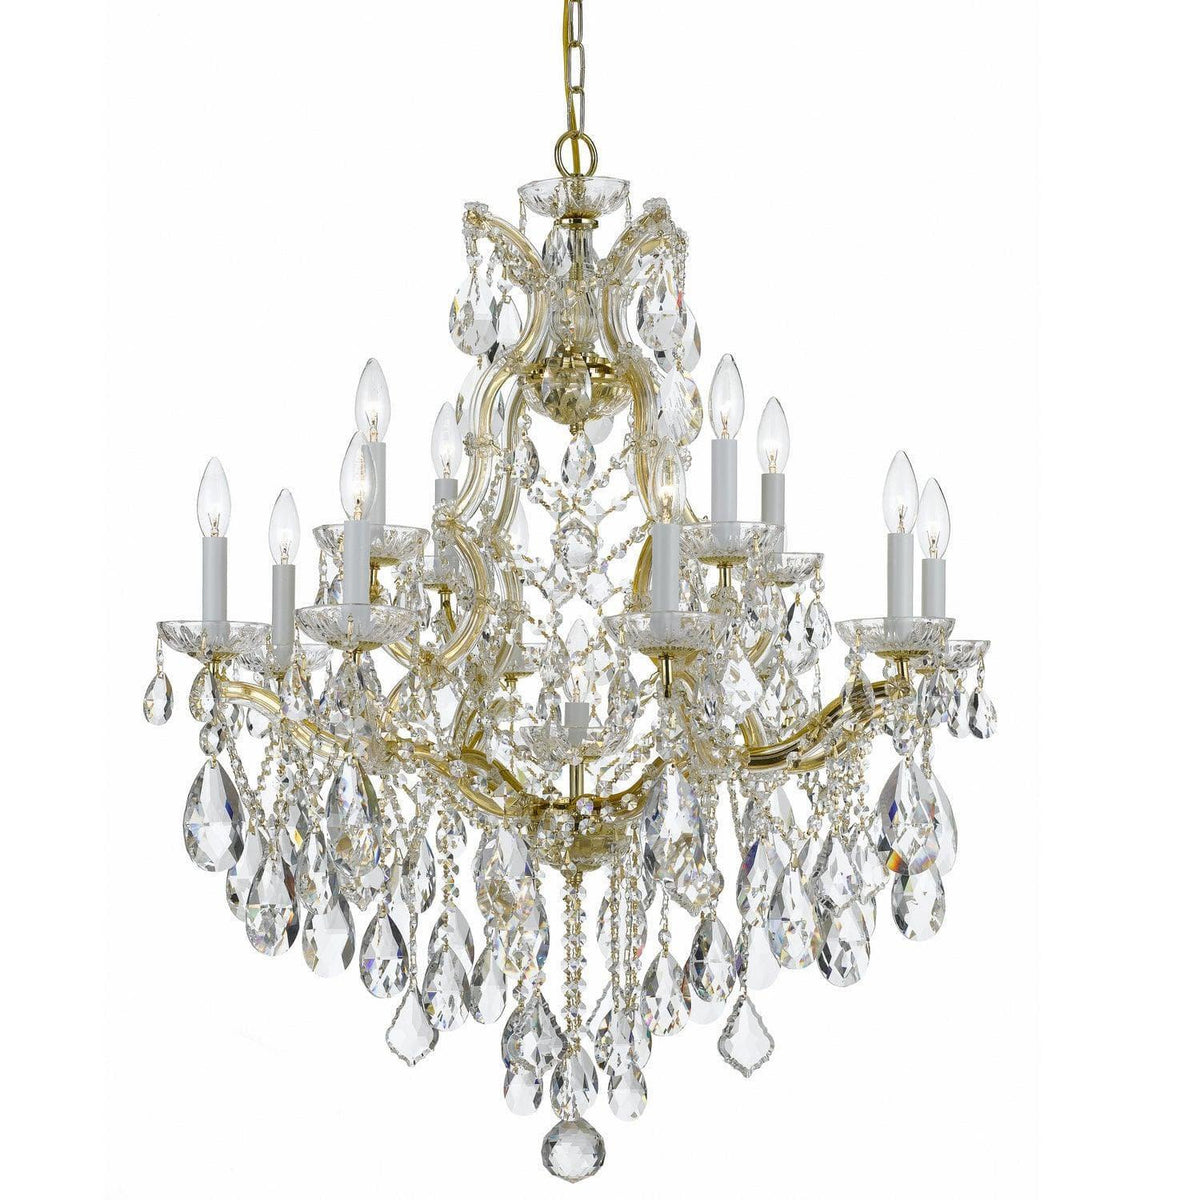 Crystorama - Maria Theresa Chandelier - 4413-GD-CL-S | Montreal Lighting & Hardware